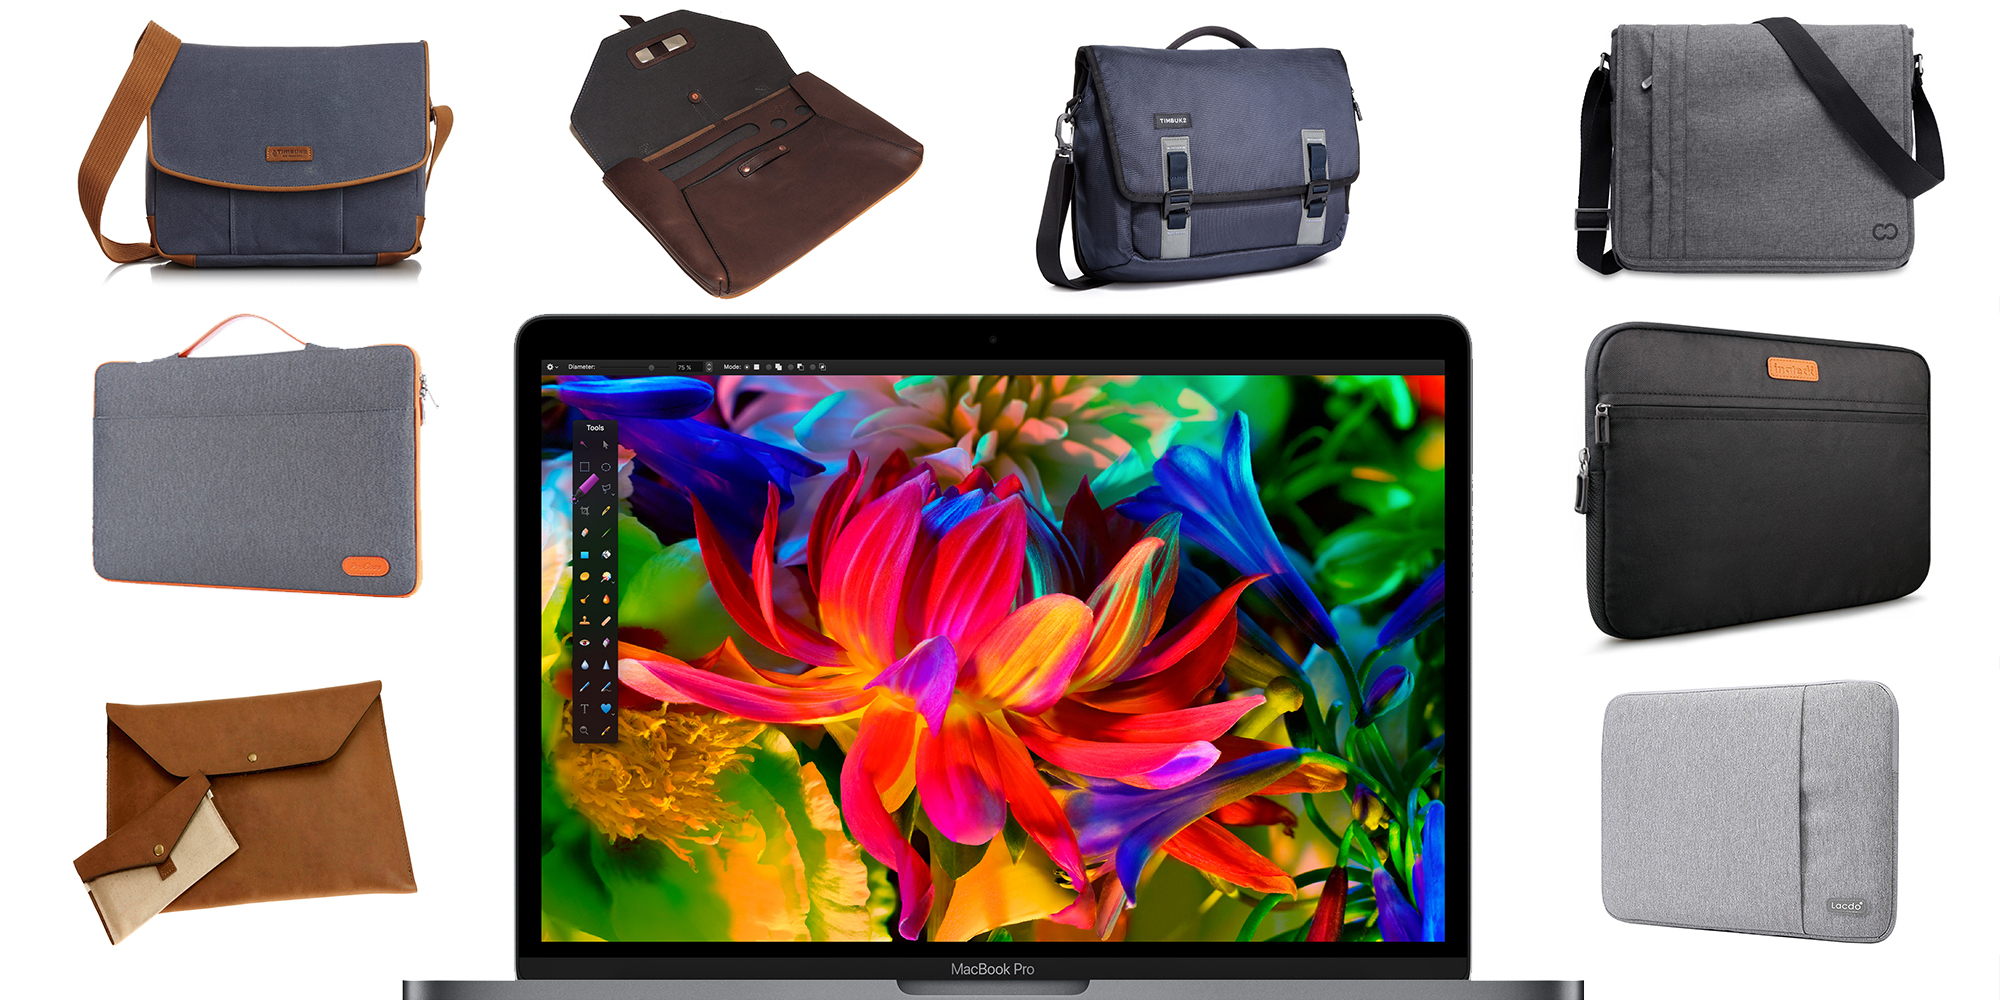 The best messenger bags, cases and sleeves for the new MacBook Pro